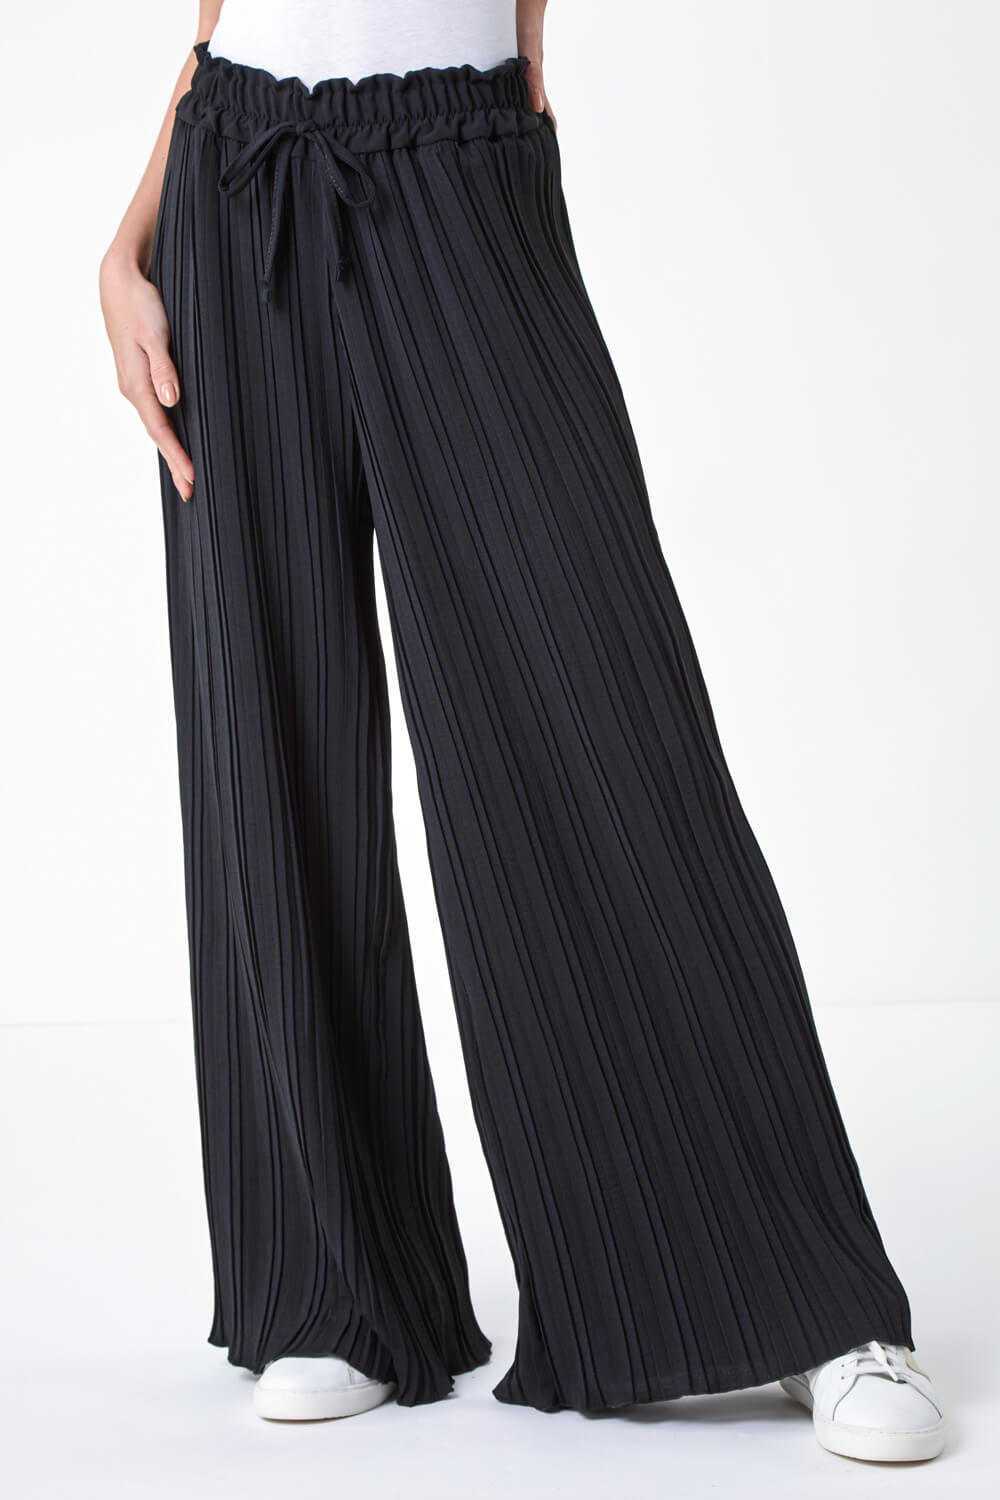 Black Pleated Tie Waist Stretch Trousers, Image 4 of 5